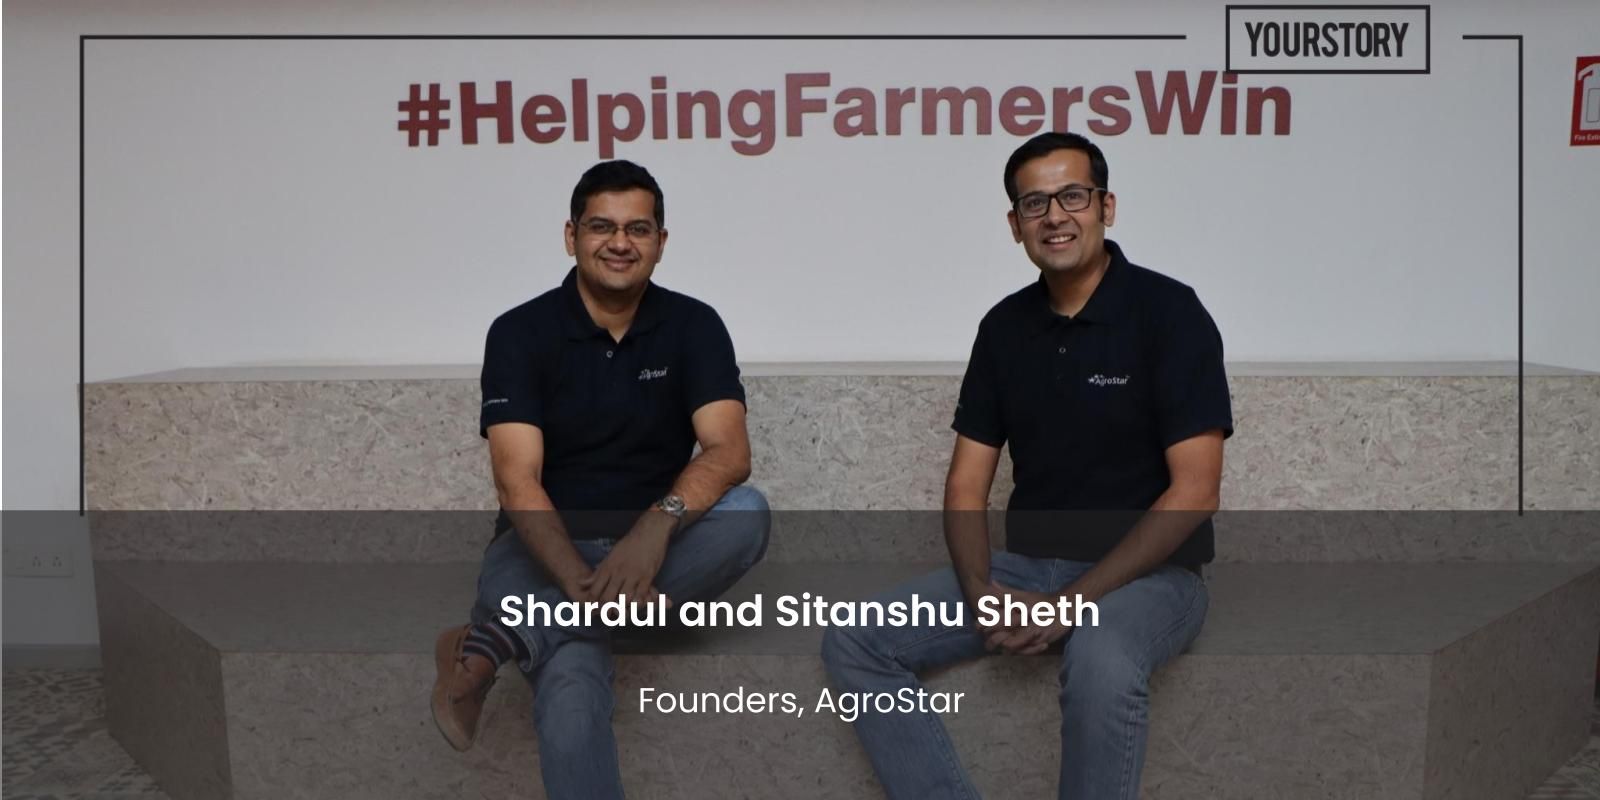 [Funding alert] AgroStar raises $70M Series D investment, will invest in tech and expansion